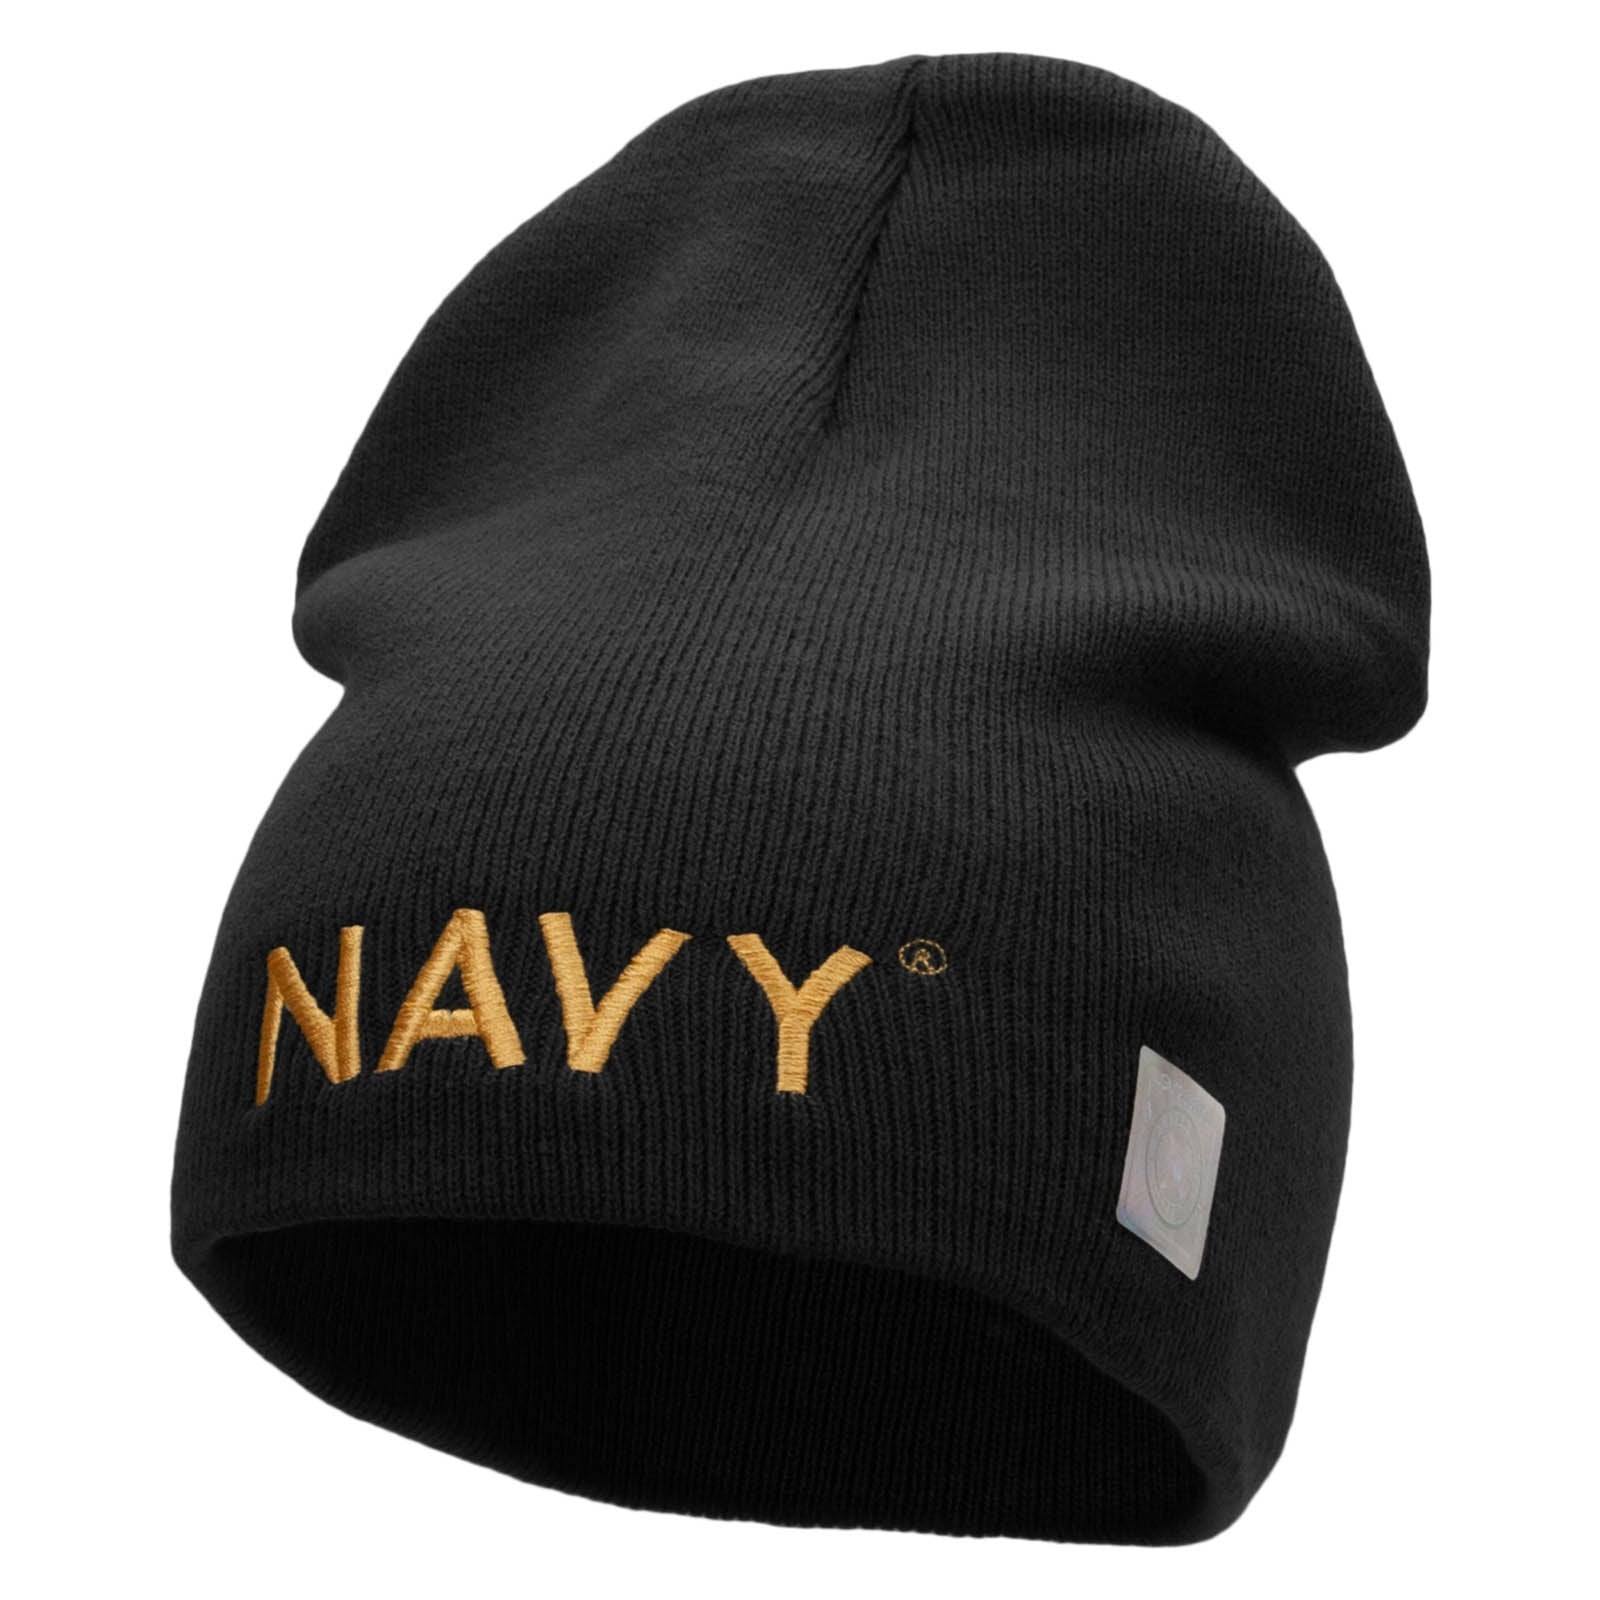 Licensed Navy Military Embroidered Short Beanie Made in USA - Black OSFM